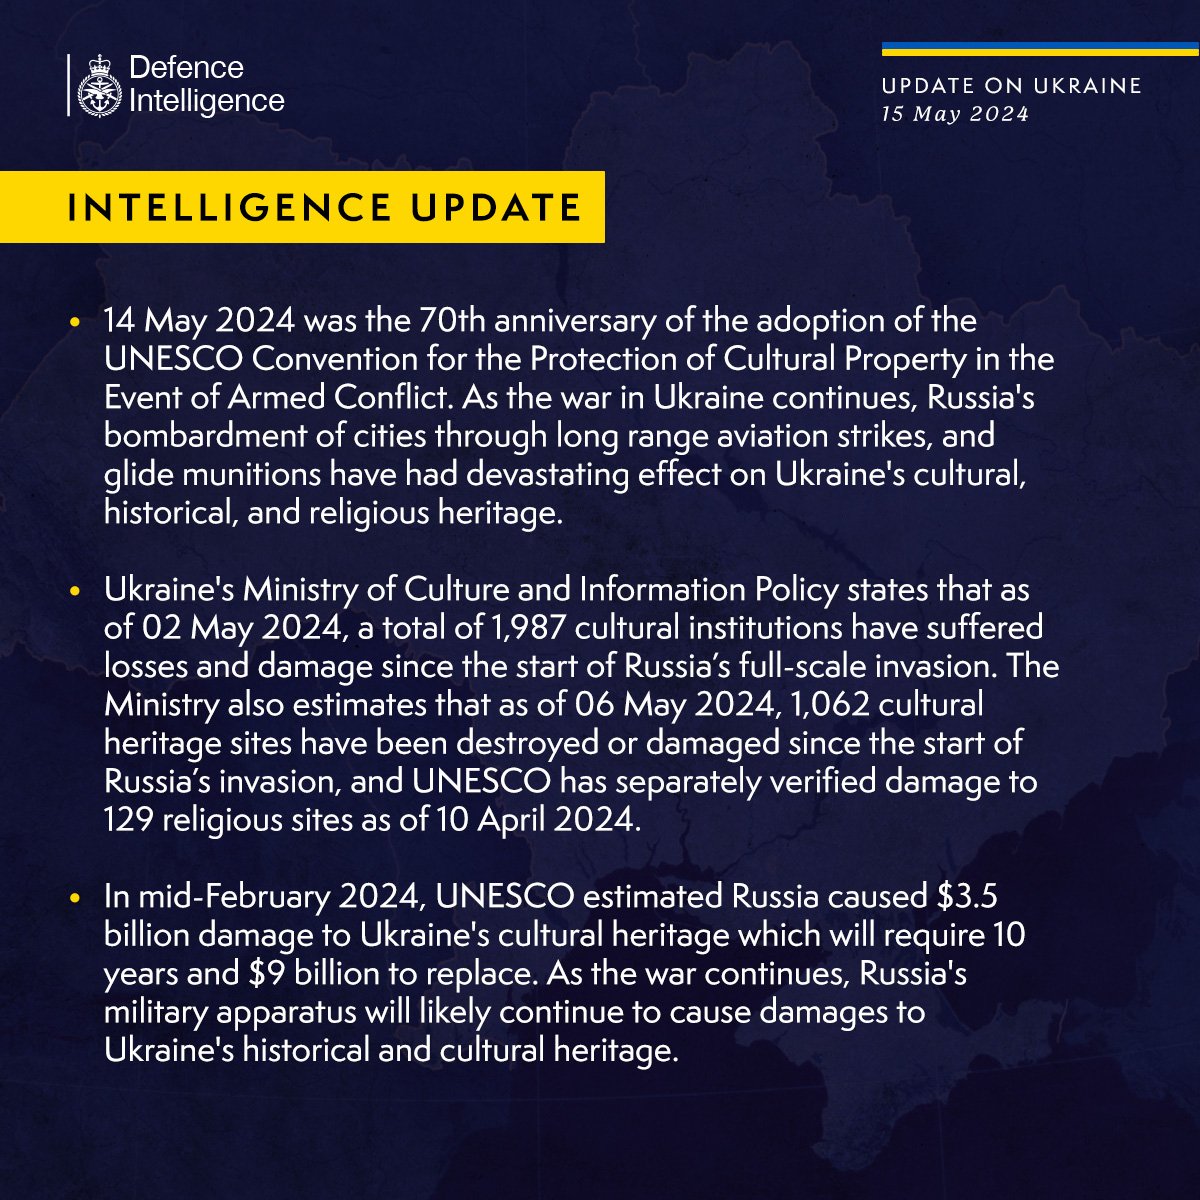 Latest Defence Intelligence update on the situation in Ukraine – 15 May 2024. Find out more about Defence Intelligence's use of language: ow.ly/O3n650RCJmZ #StandWithUkraine 🇺🇦